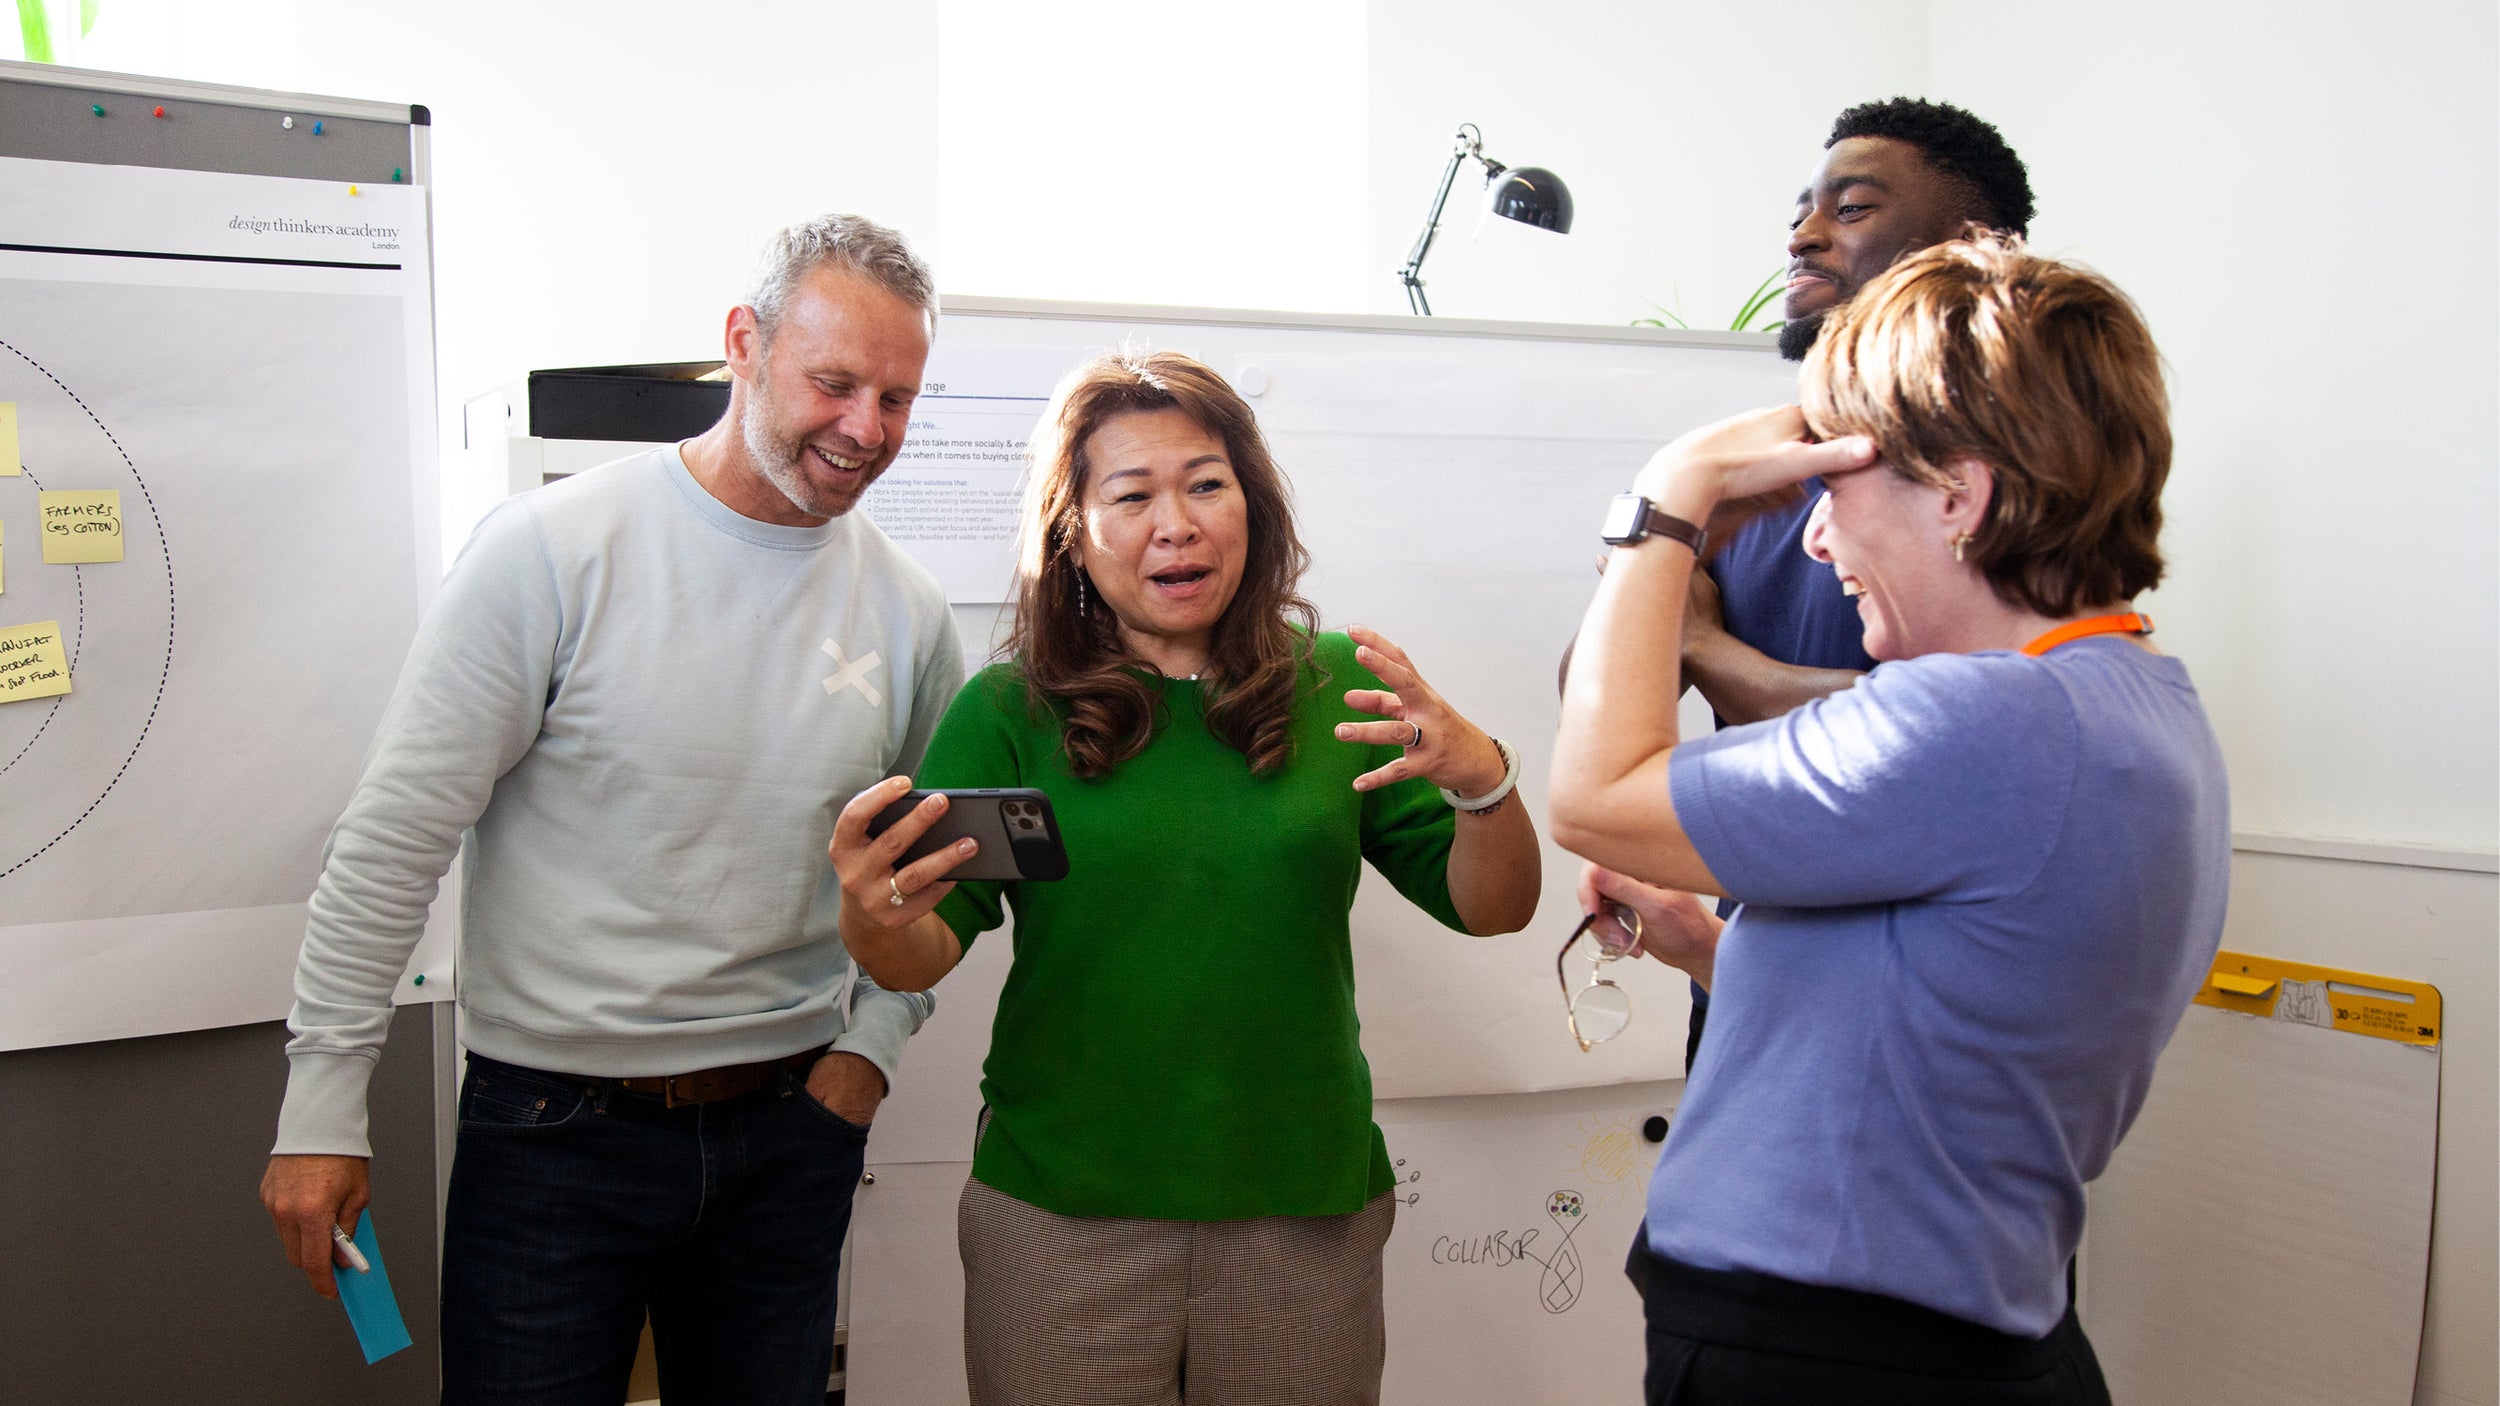 A group of people at one of our courses, gathered around a phone looking at a prototype and laughing